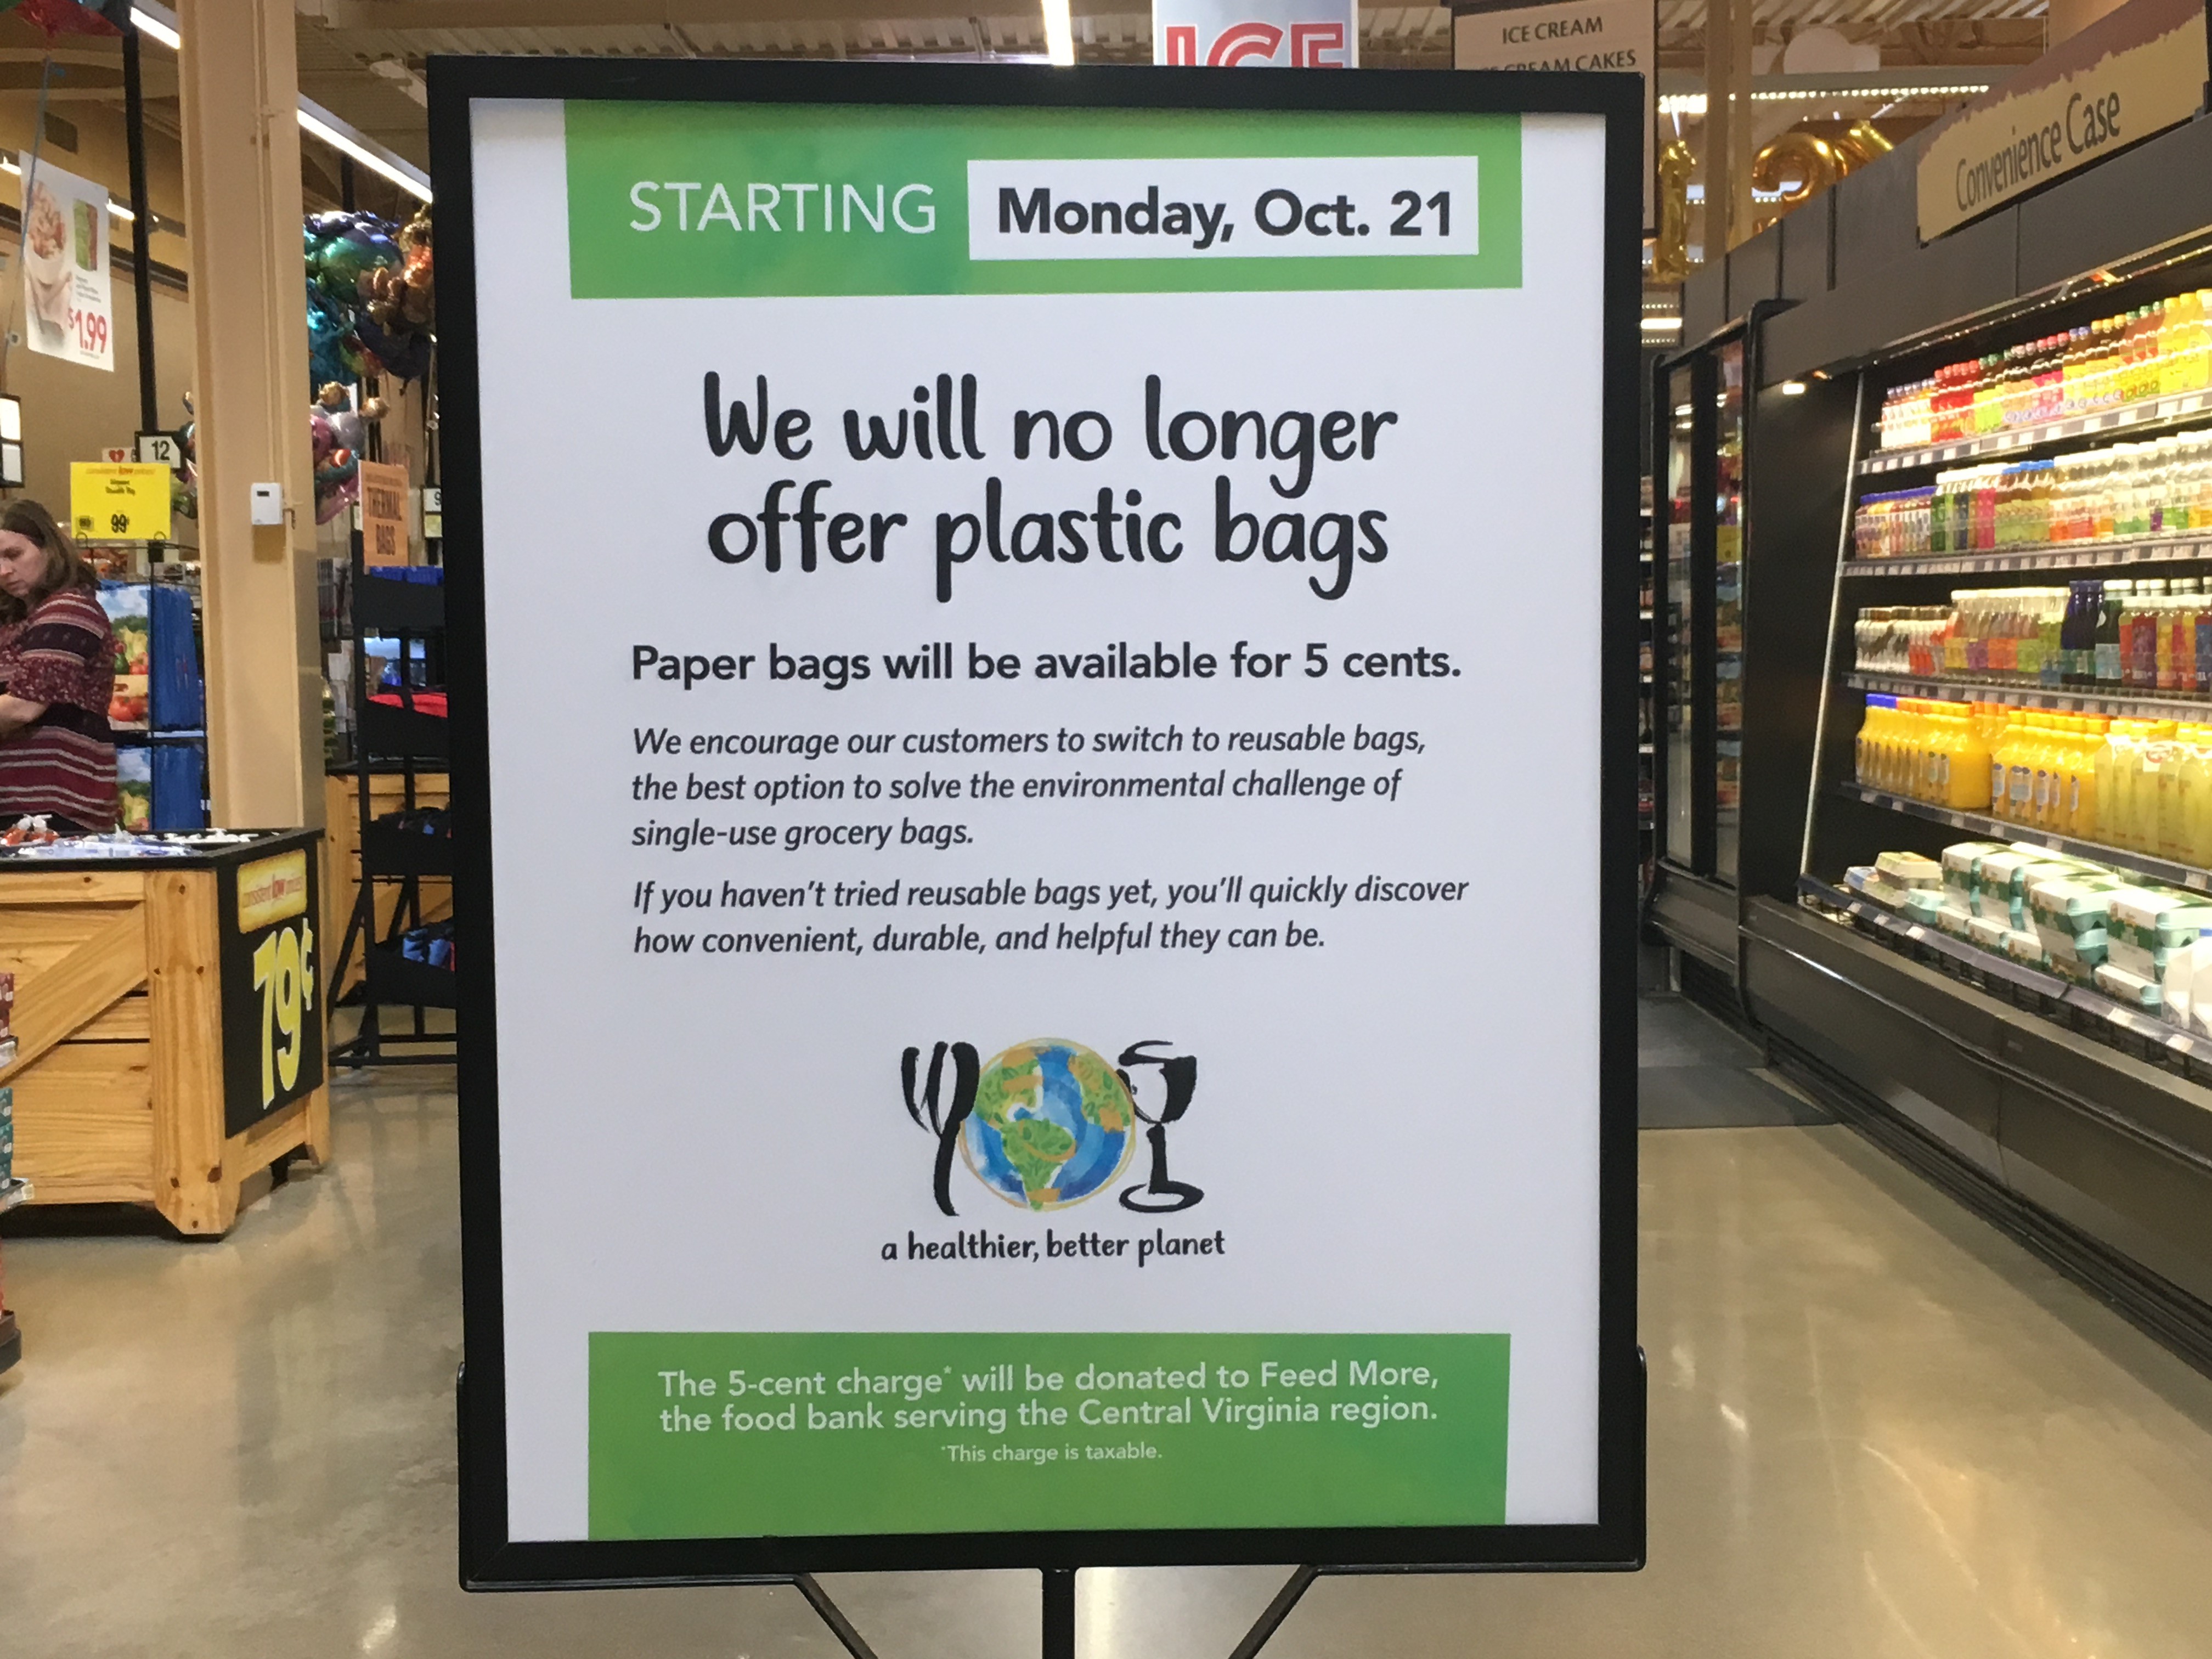 Wegmans eliminating plastic grocery bags statewide, charging for paper bags  : r/nova